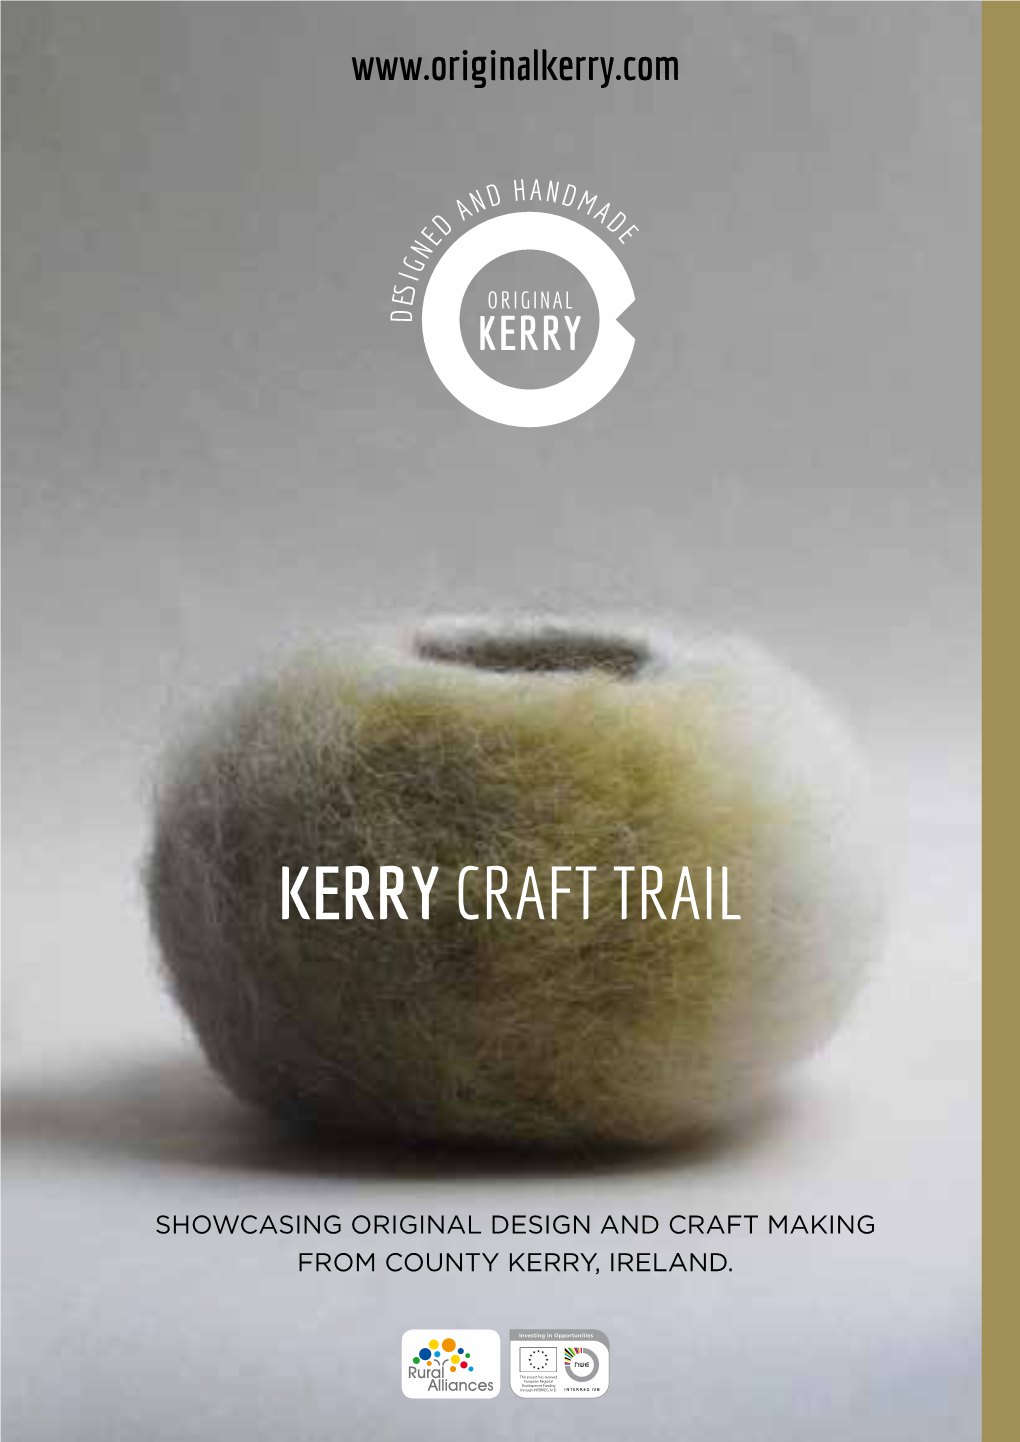 Kerry Craft Trail Offers SHOWCASING ORIGINAL DESIGN and CRAFT MAKING a Wild Atlantic Way from COUNTY KERRY, IRELAND